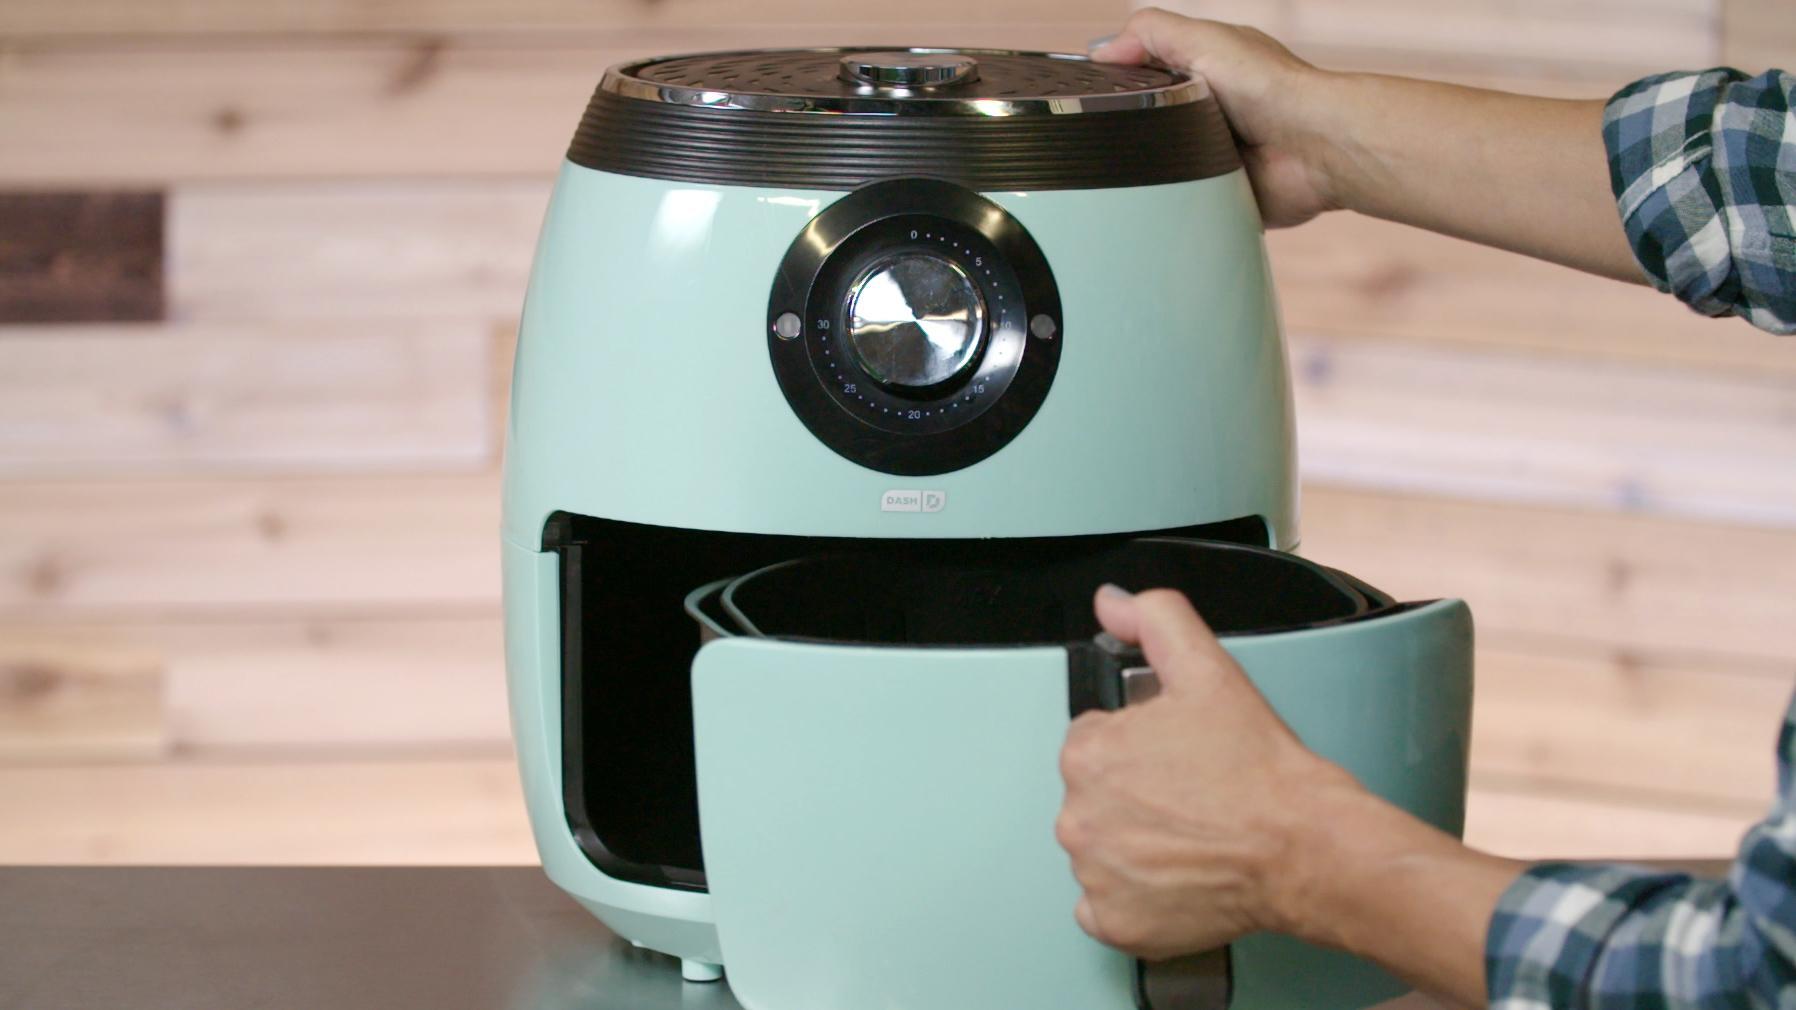 Beautiful by Drew Barrymore 19089 Air Fryer Review - Consumer Reports